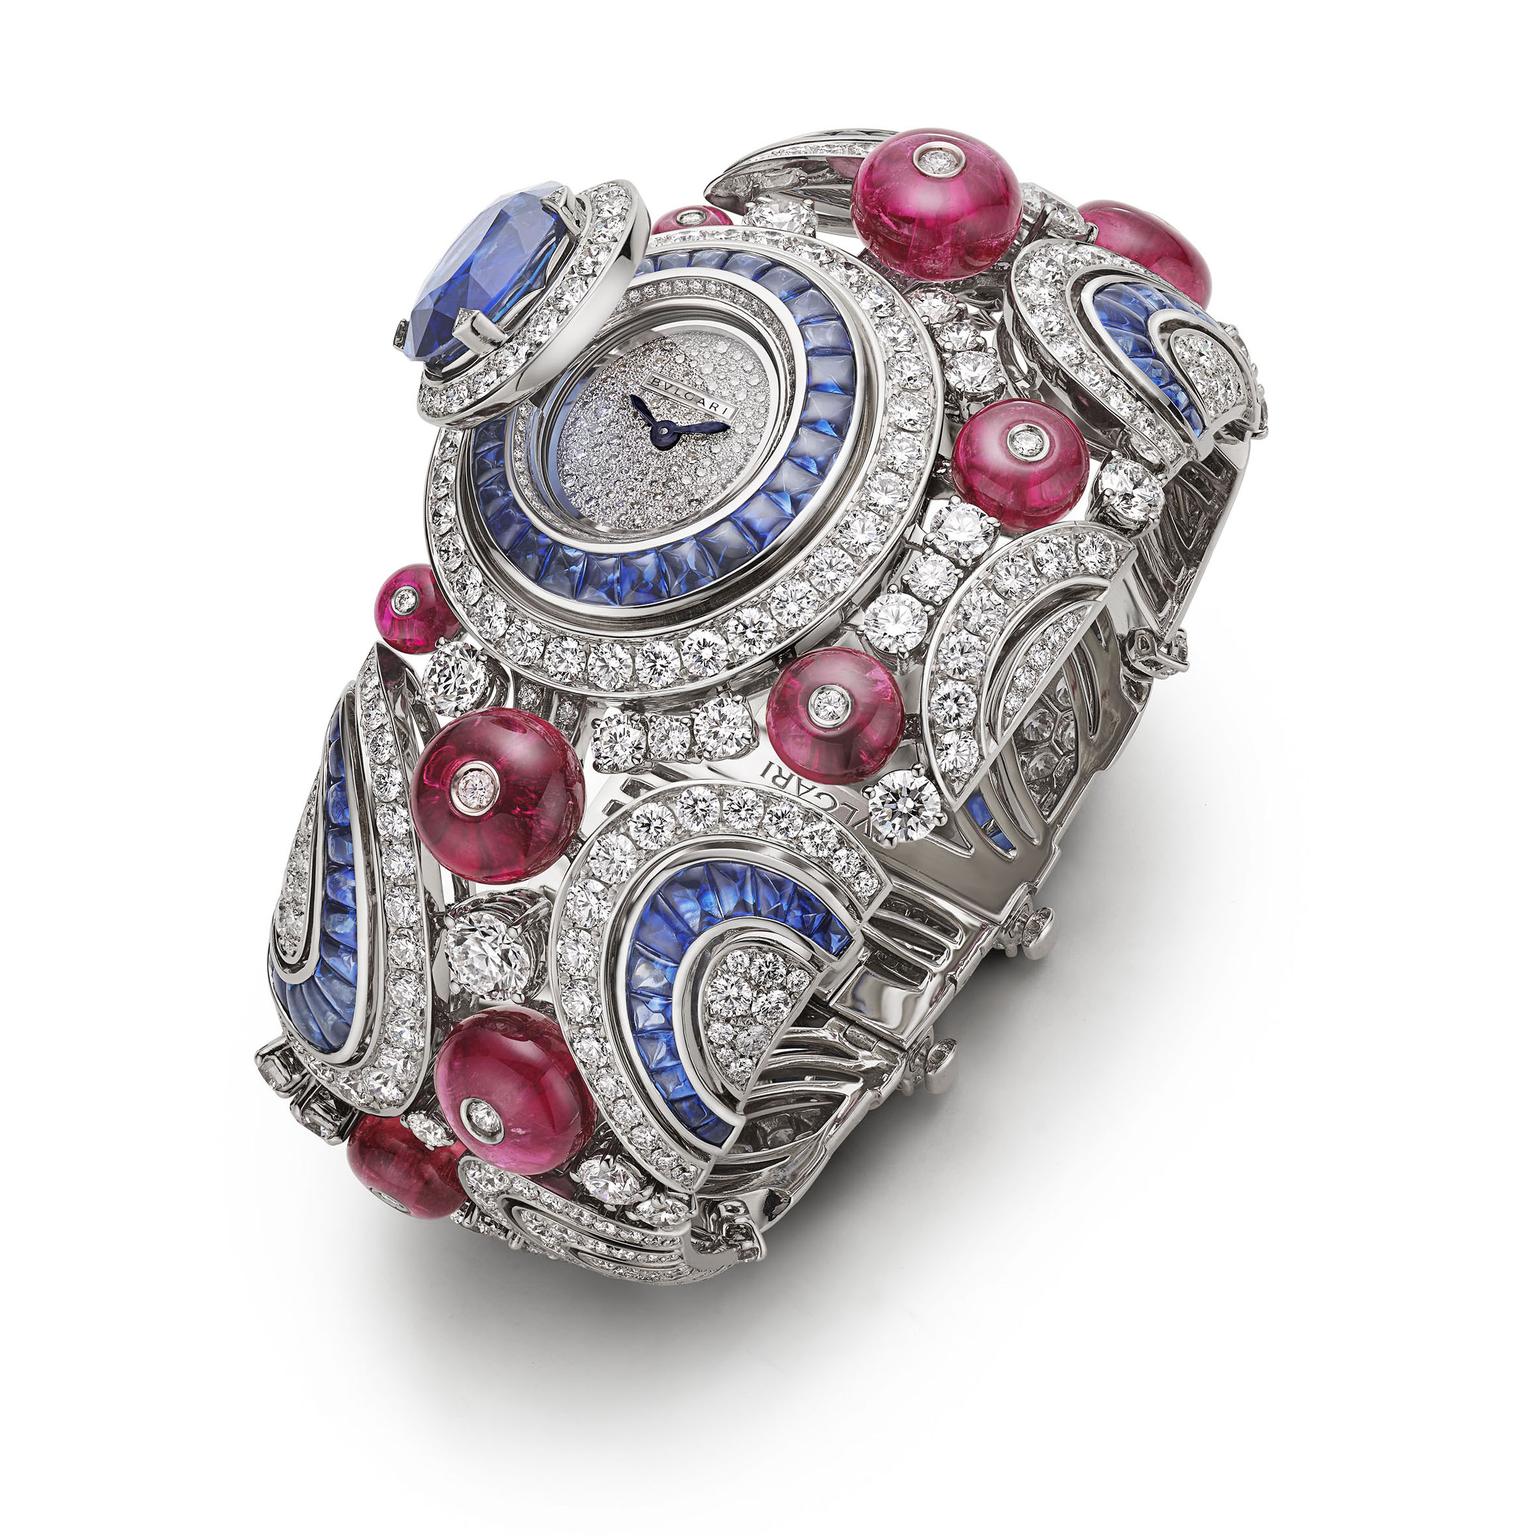 MAGNIFICA Celestial Sky high-end watch by Bulgari